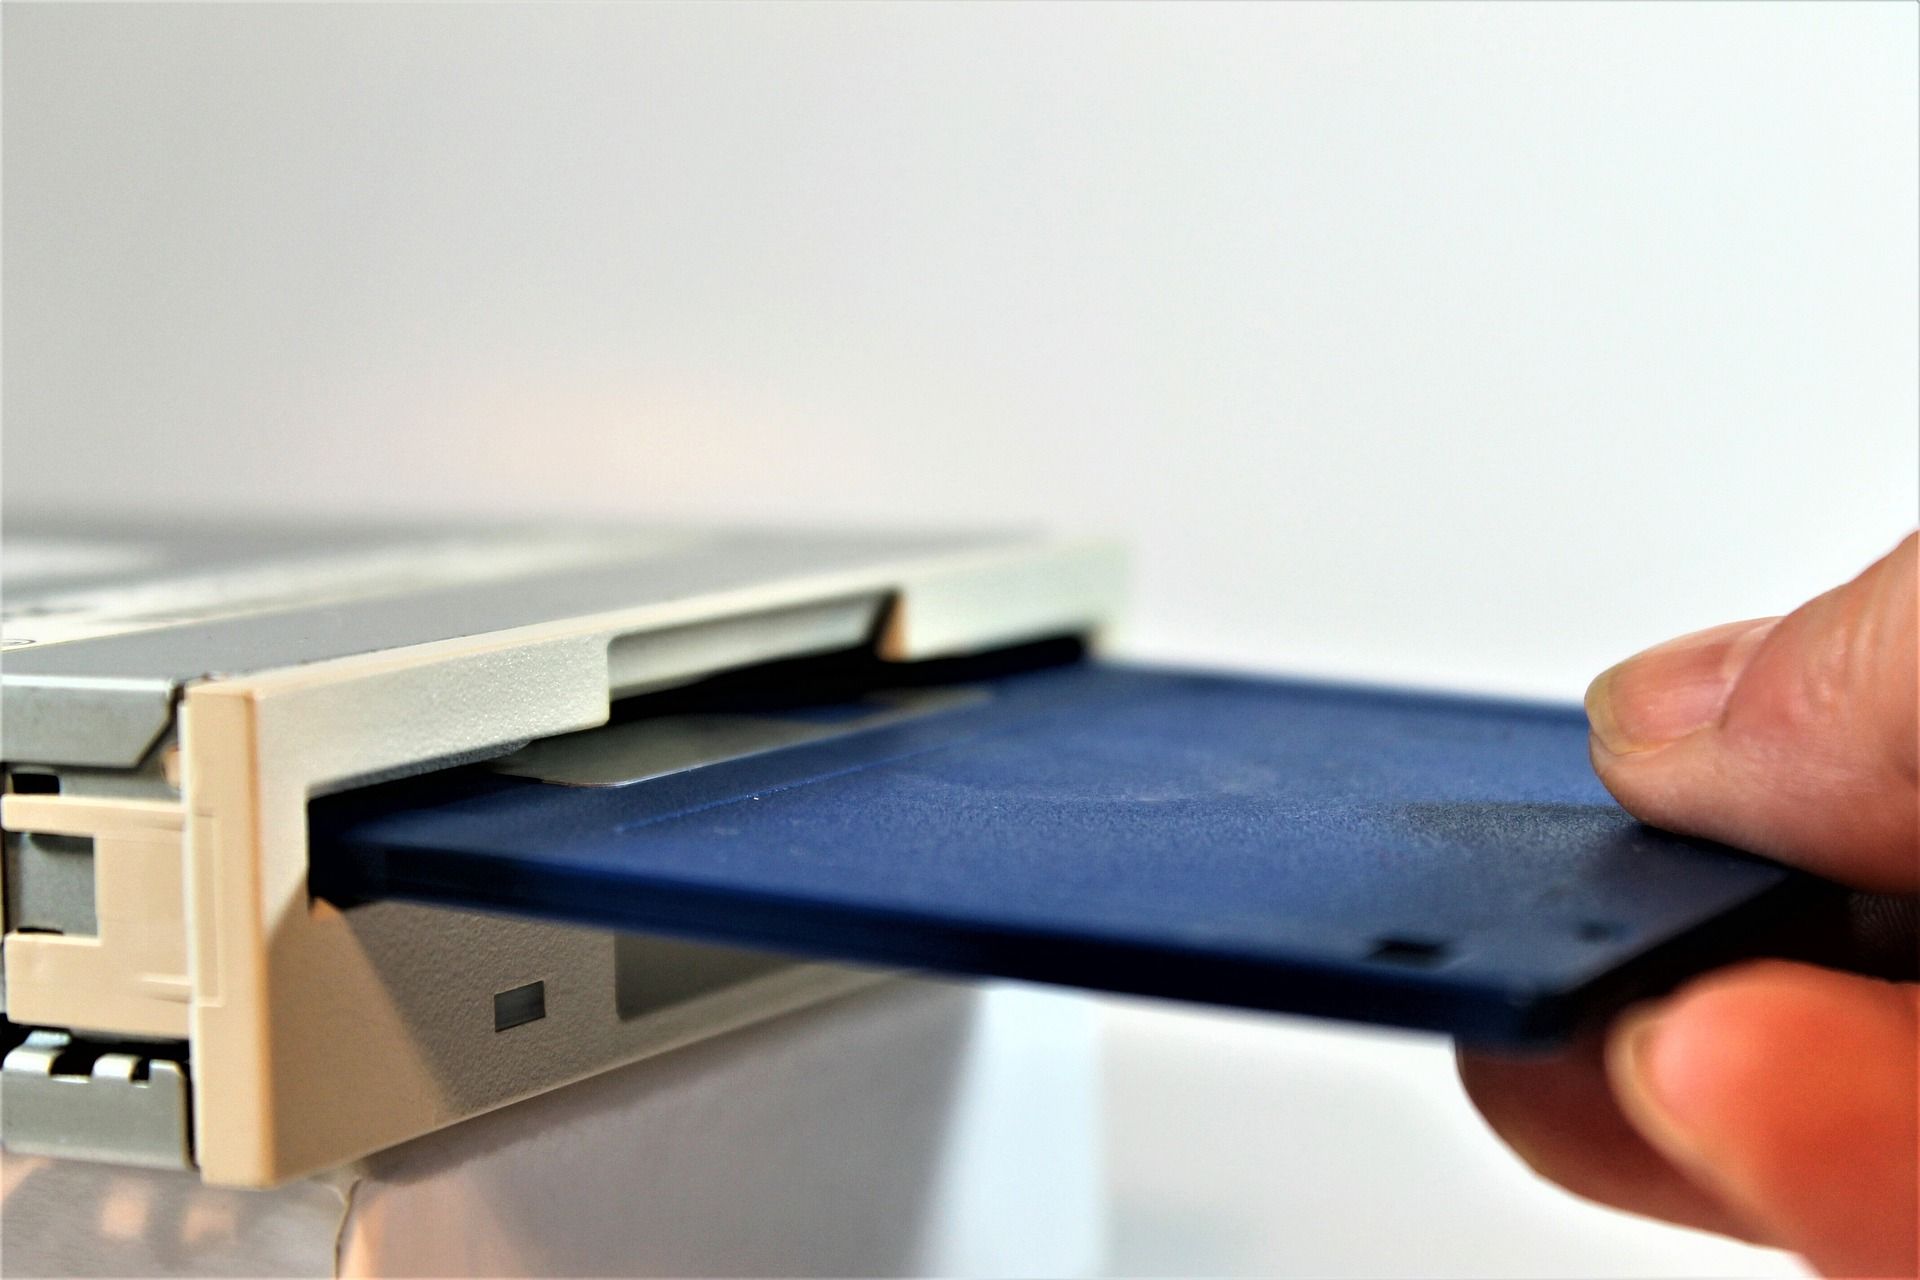 Blue Floppy Disk being inserted into drive with white background